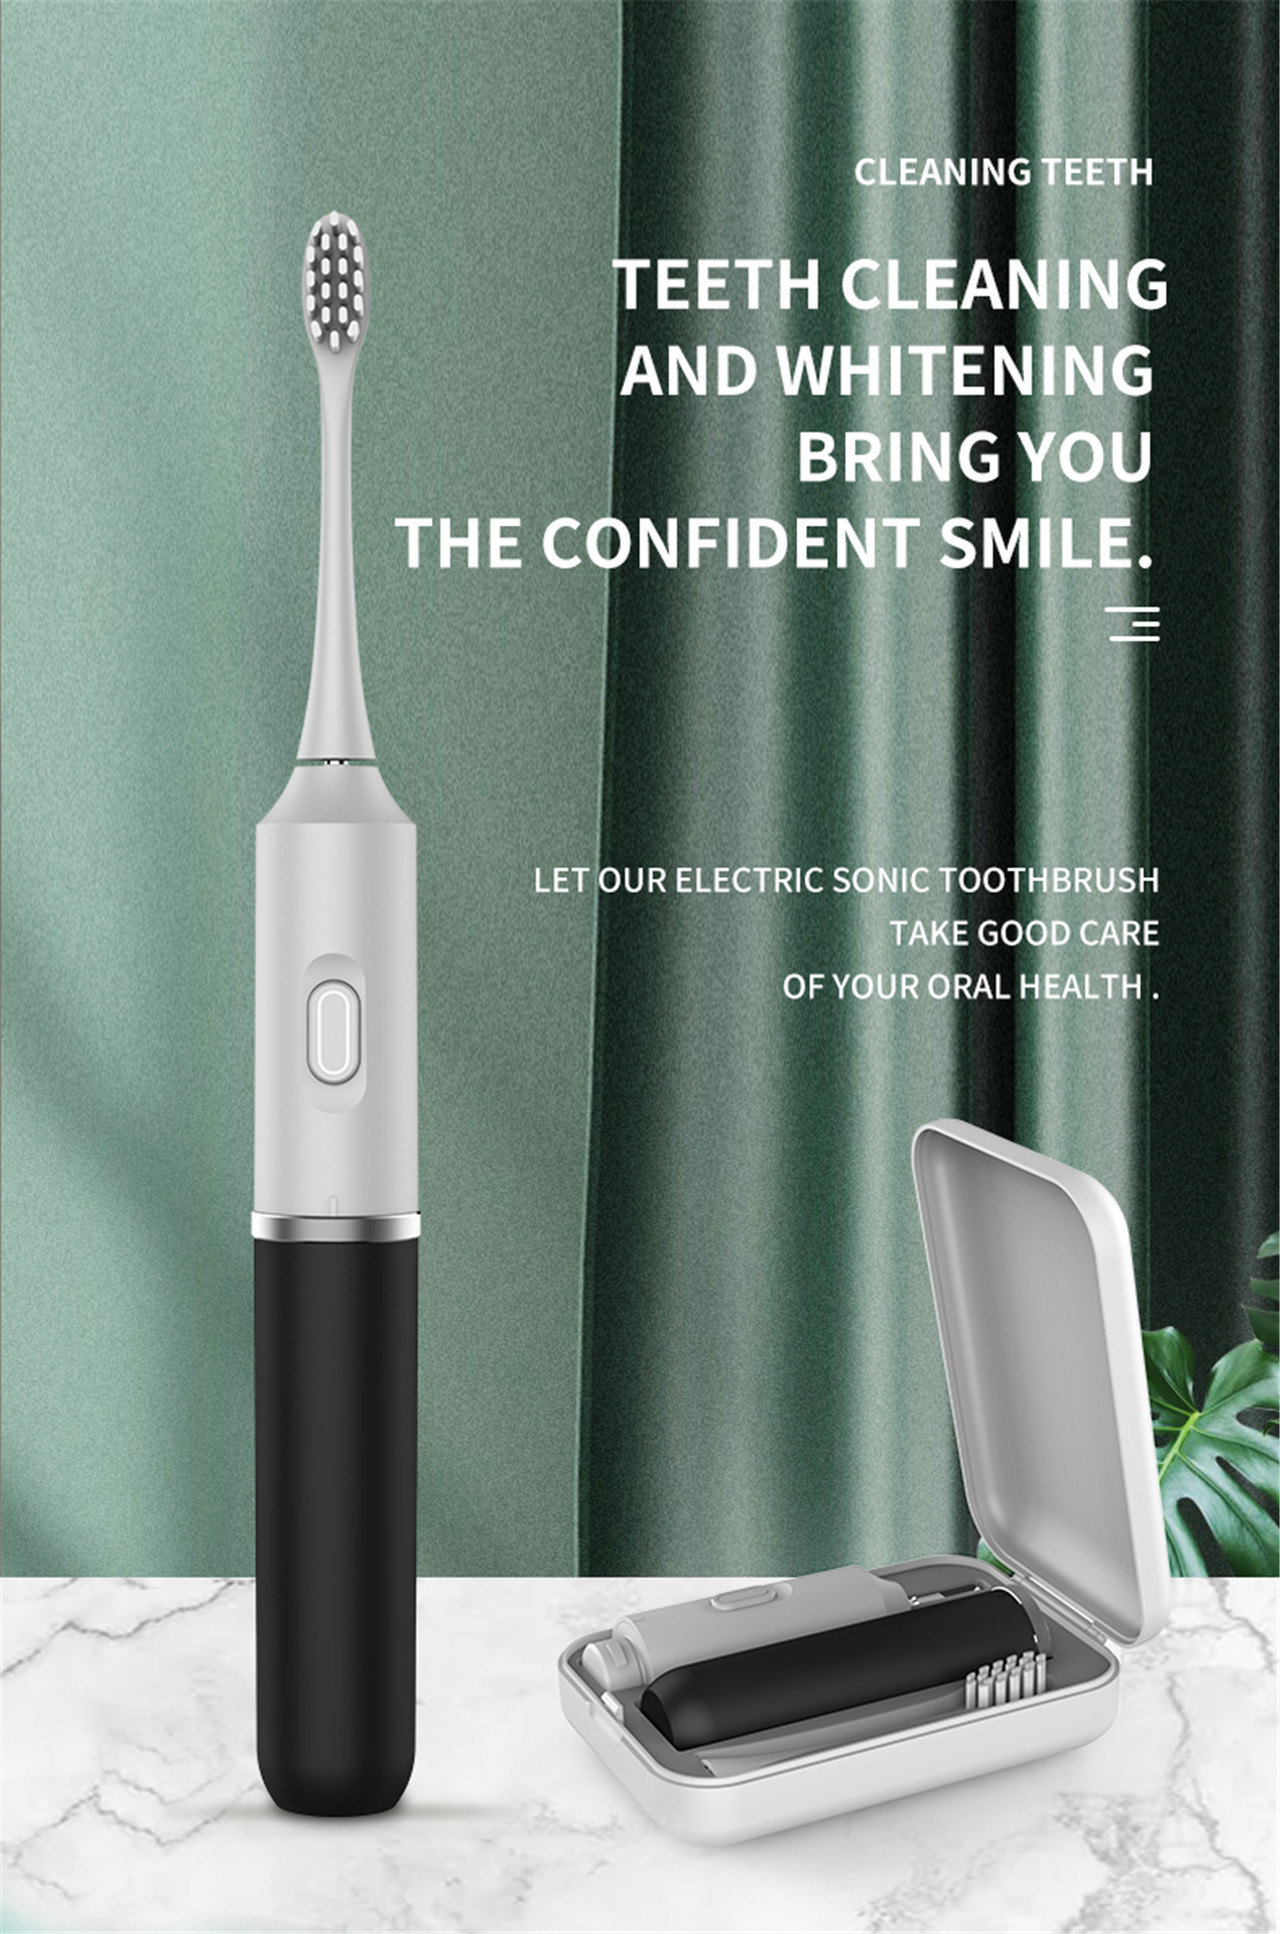 Portab Electric Adults Sonic Toothbrush easy to put in pocket (1)